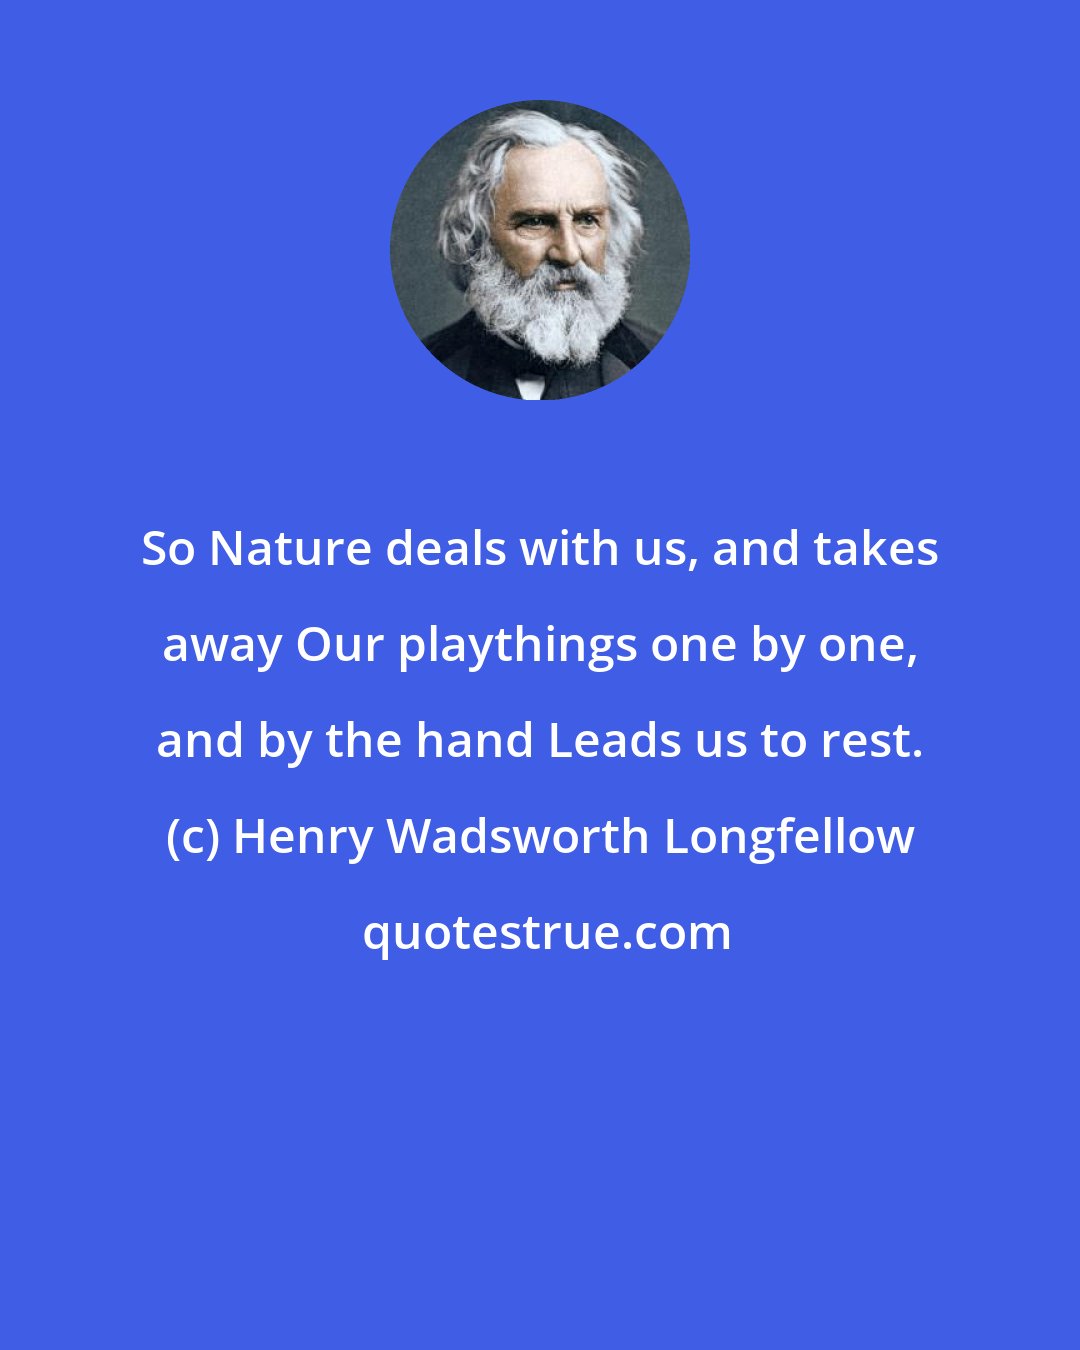 Henry Wadsworth Longfellow: So Nature deals with us, and takes away Our playthings one by one, and by the hand Leads us to rest.